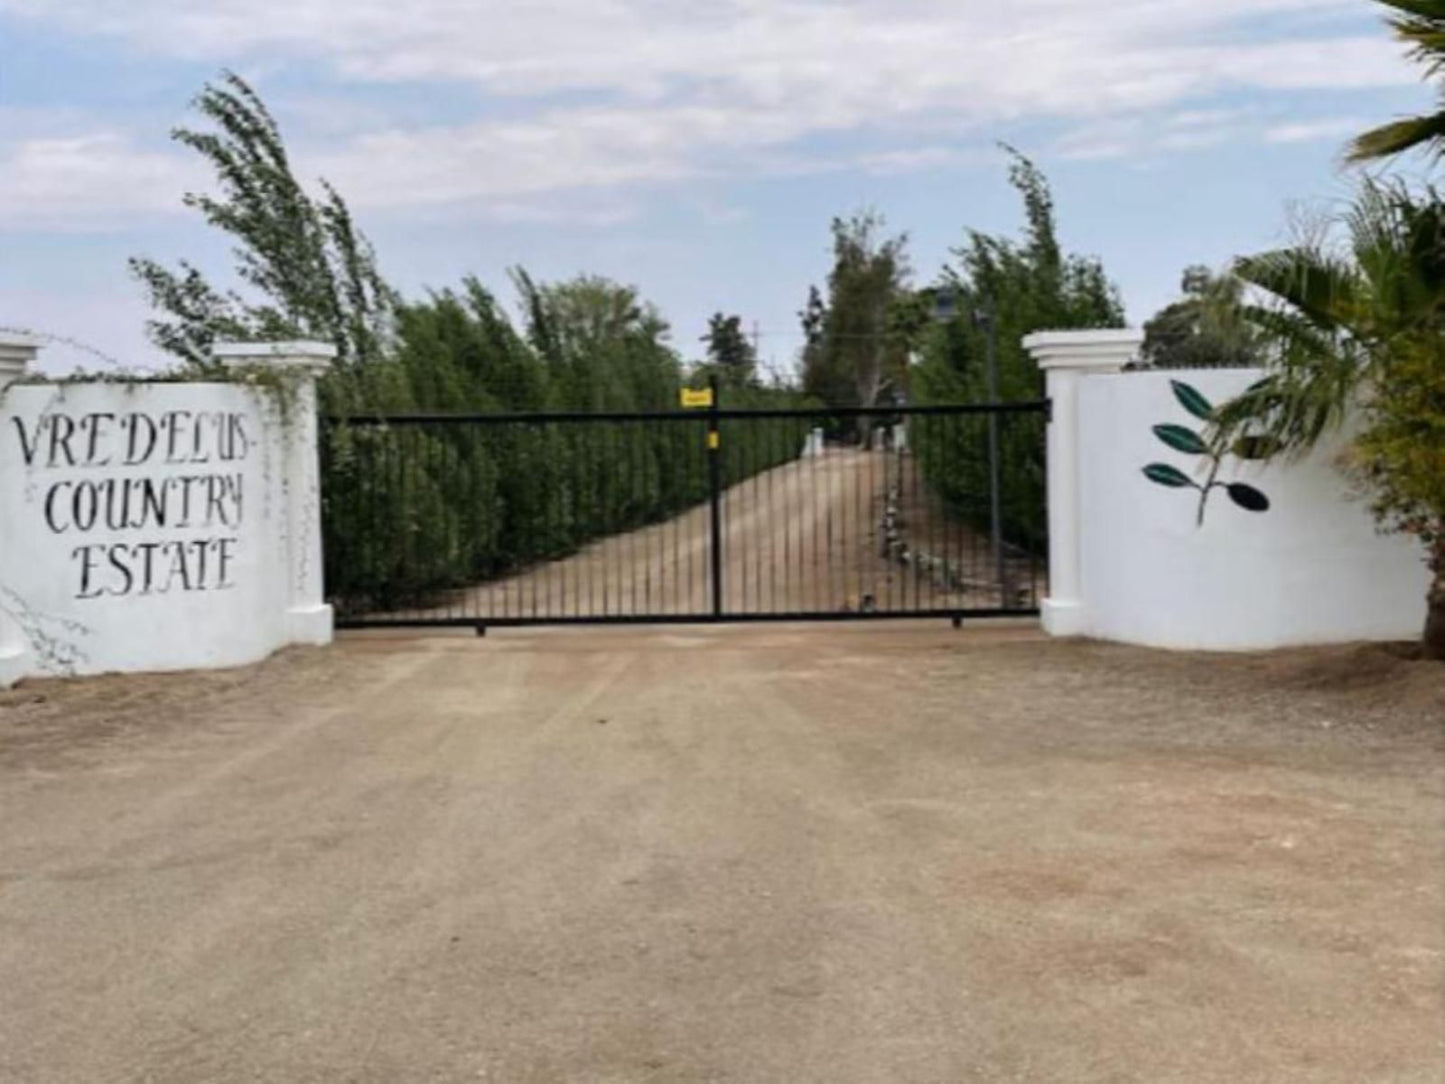 Vredelus Country Estate Upington Northern Cape South Africa Complementary Colors, Gate, Architecture, Sign